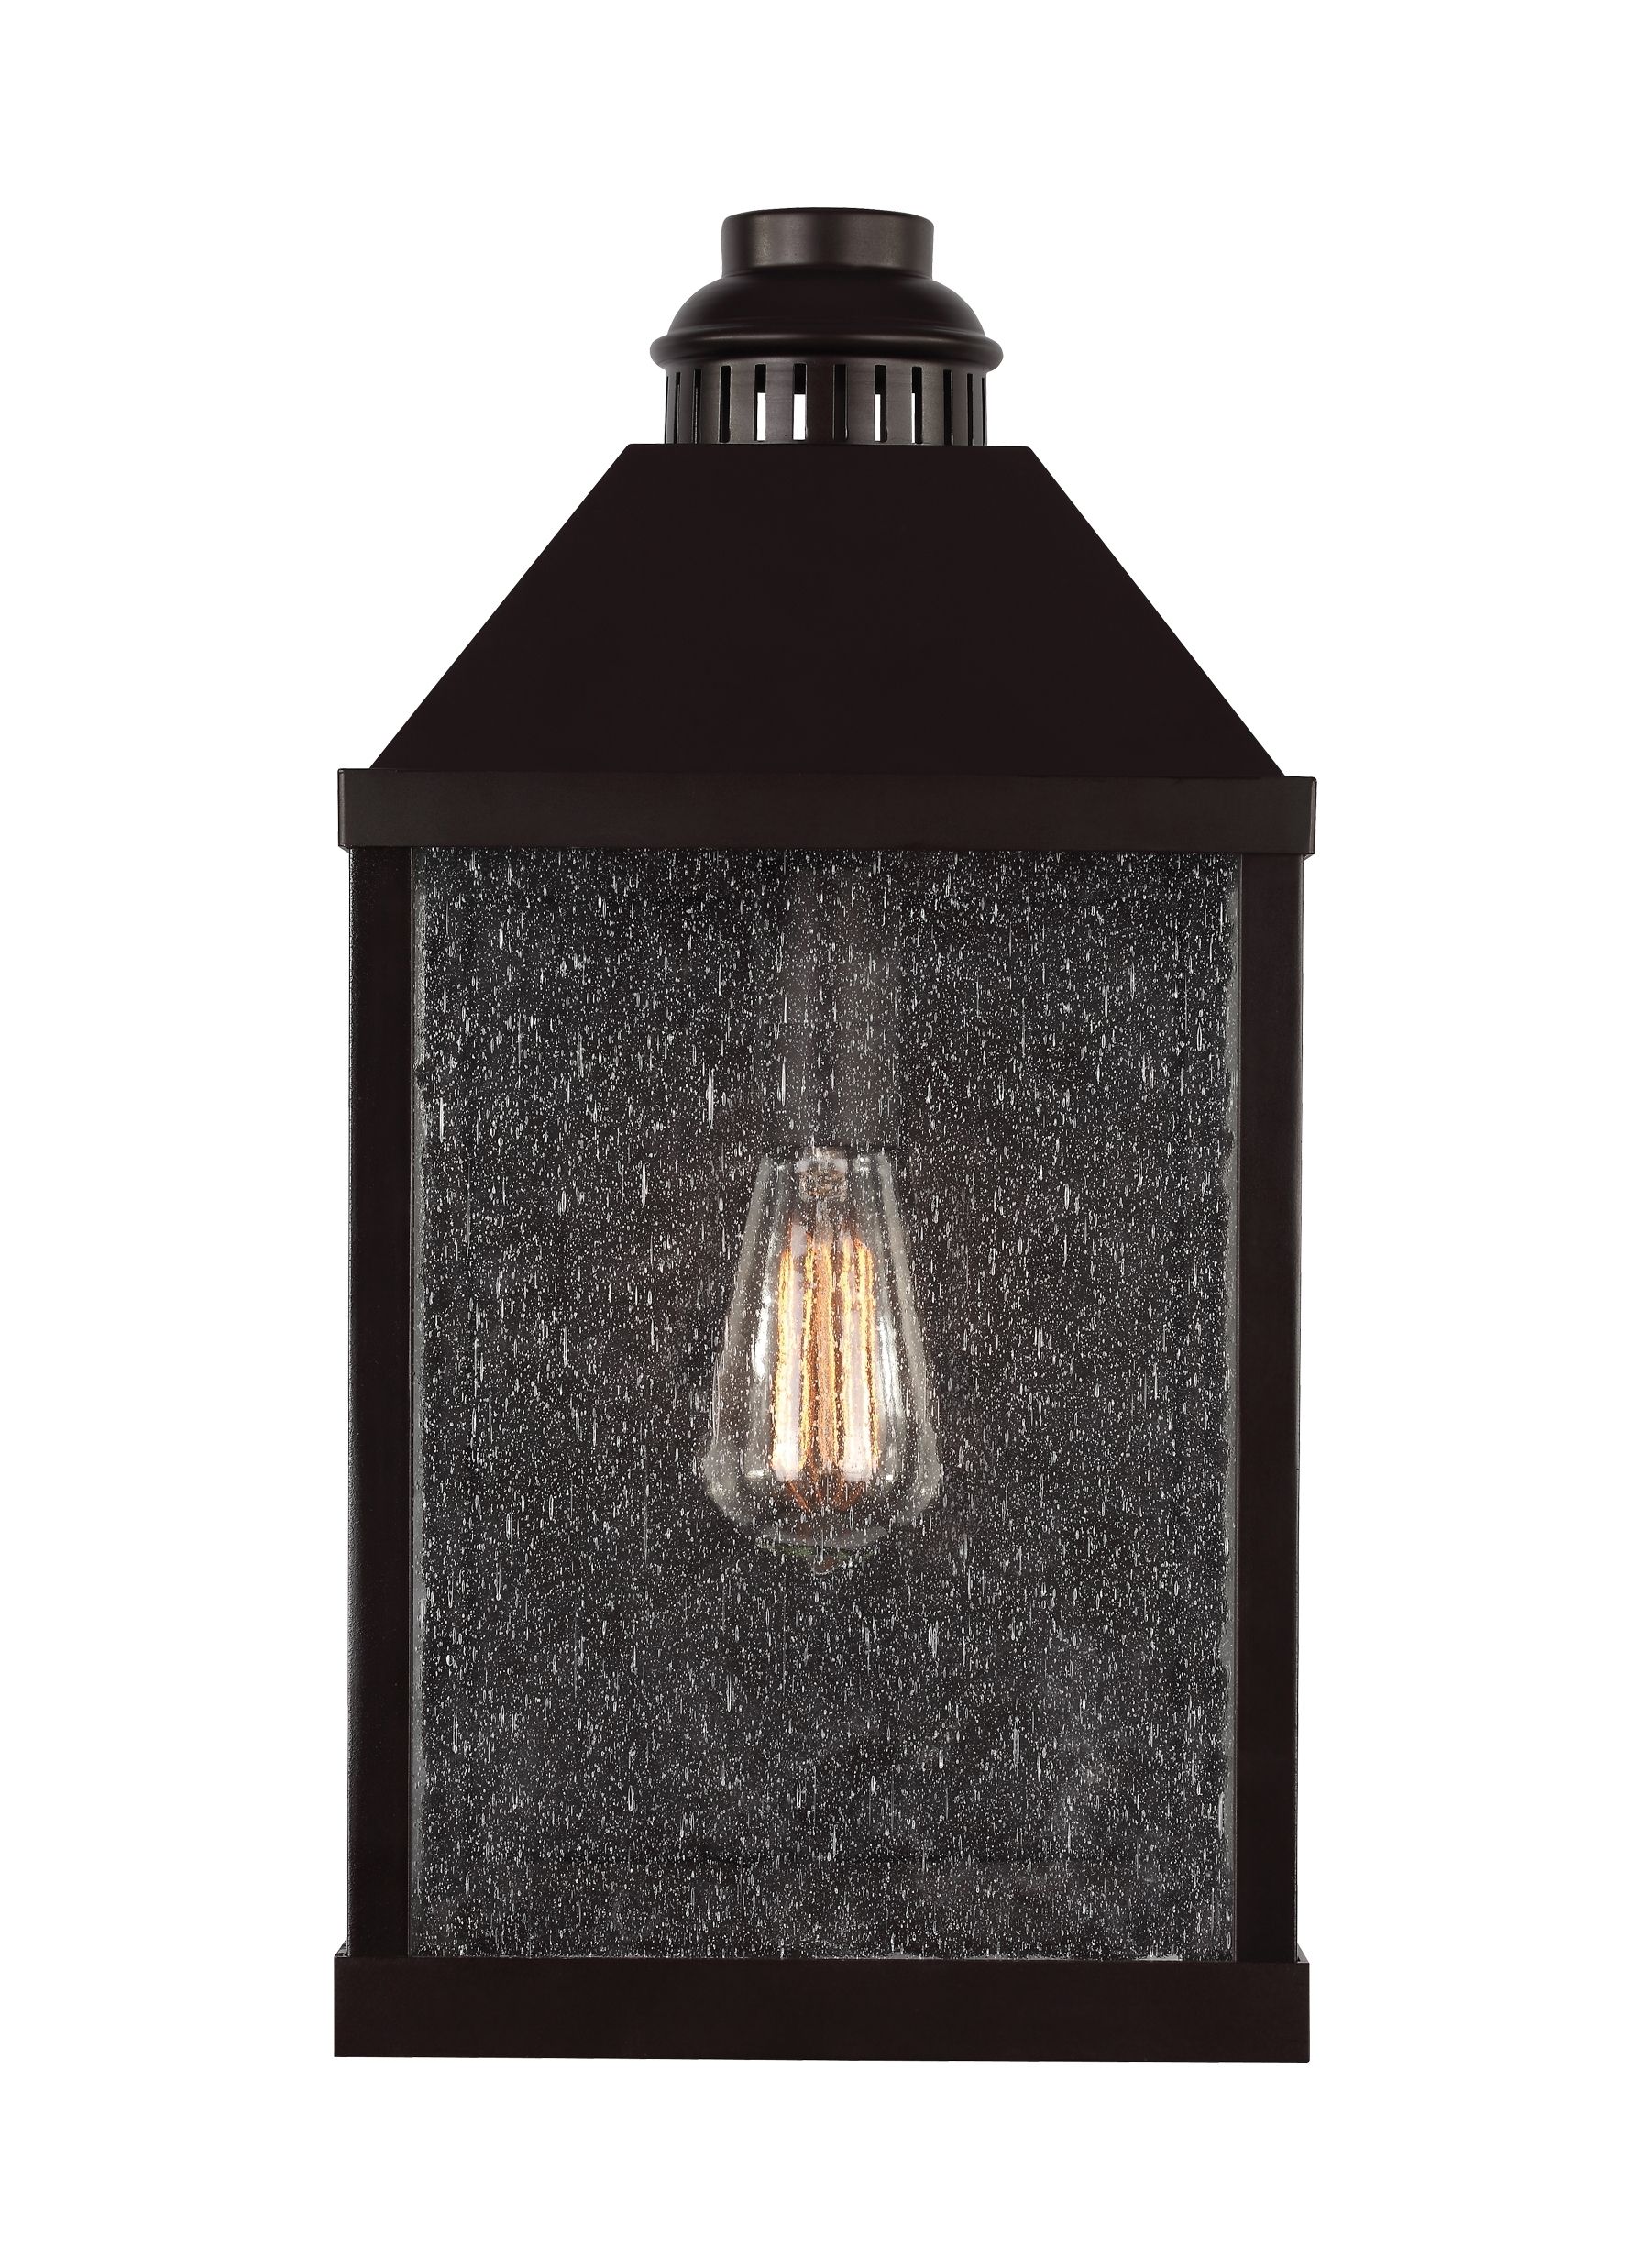 Light Fixtures Rustic Wall Sconce Fixture Lodge Style Sconces Inside Rustic Outdoor Electric Lanterns (Photo 11 of 20)